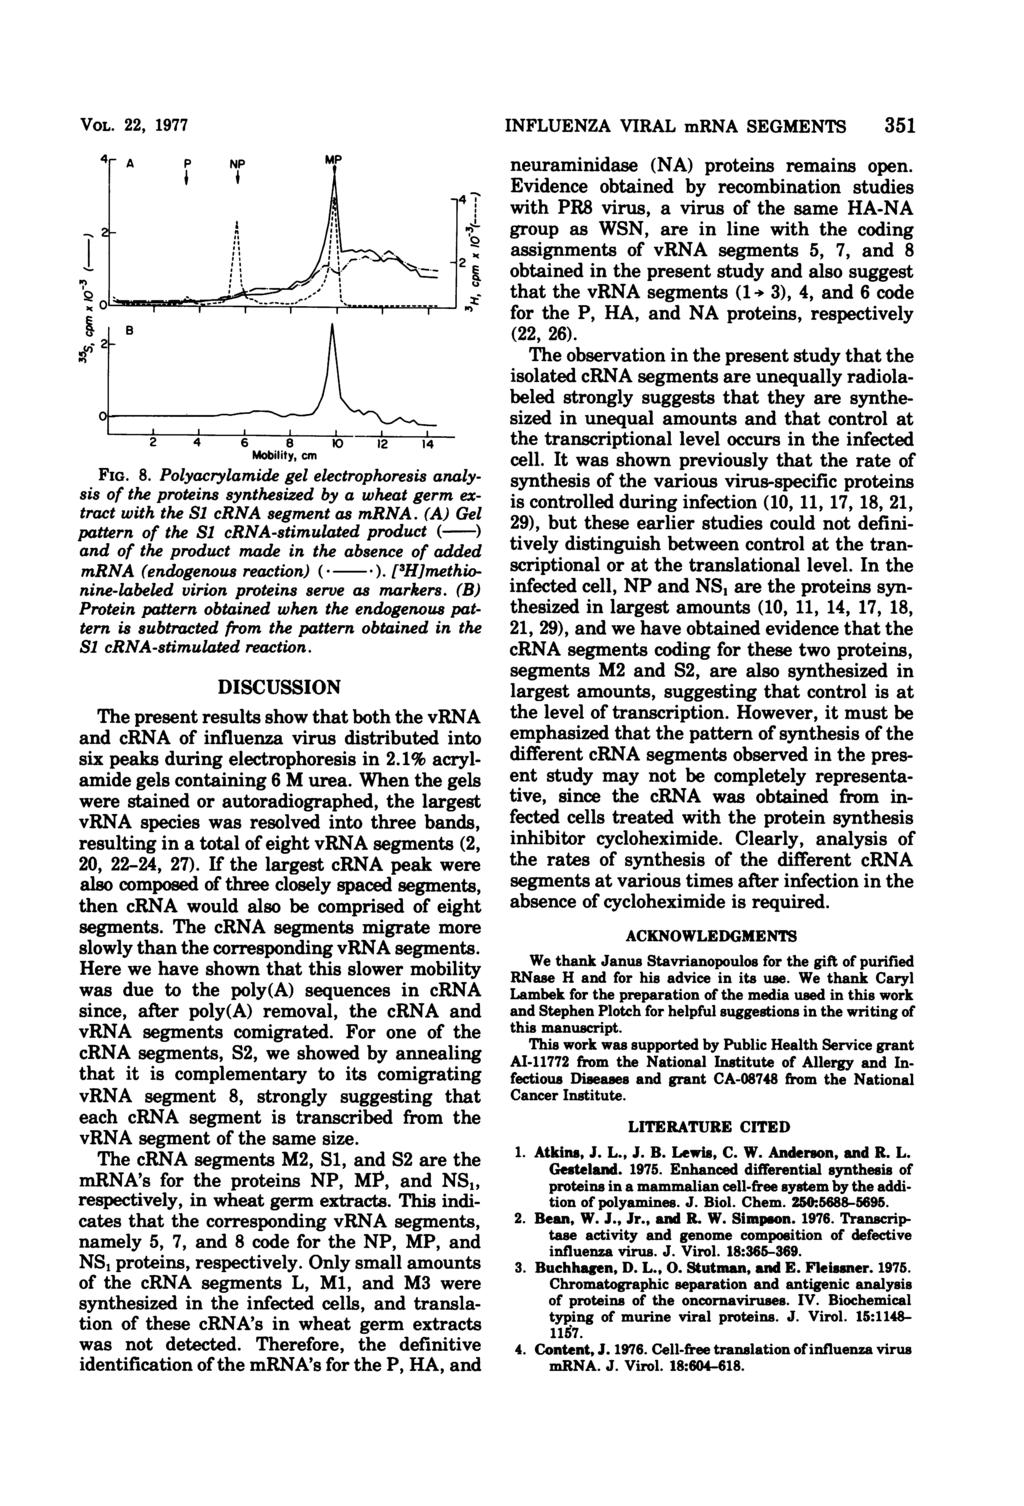 VOL. 22, 1977 4I- A P NP MP I I-C.. 11~~~~~~~~1 o ~ ~~~~~ III 8--- - 1-2 3. 2 4 6 8 10 12 14 FIG. 8. Polyacrylamide gel electrophoresis analysis of the proteins synthesized by a wheat germ extract with the SI crna segment as mrna.